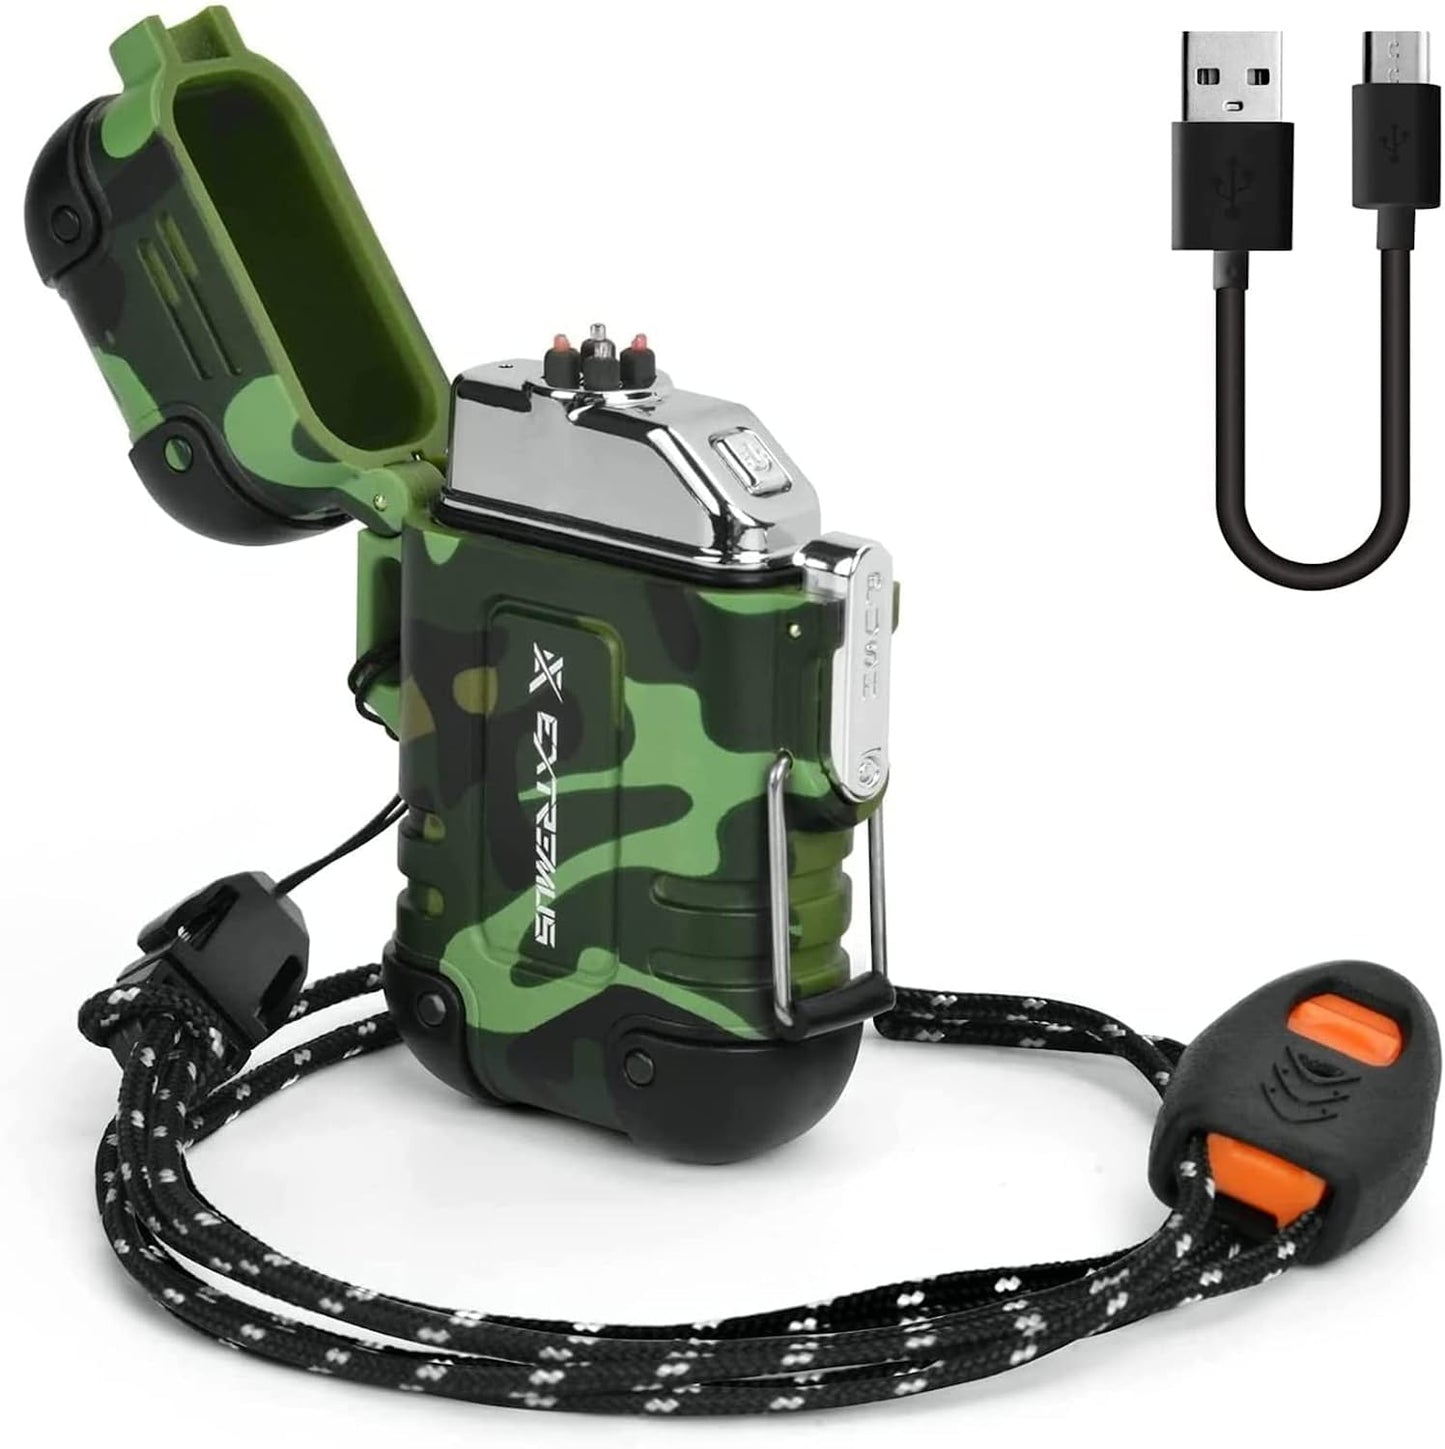 360 Waterproof Lighter,Outdoor Windproof Lighter Dual Arc Lighter USB Rechargeable Flameless Lighter,Plasma Lighters for Camping,Hiking,And Outdoor Adventures, Green Camo